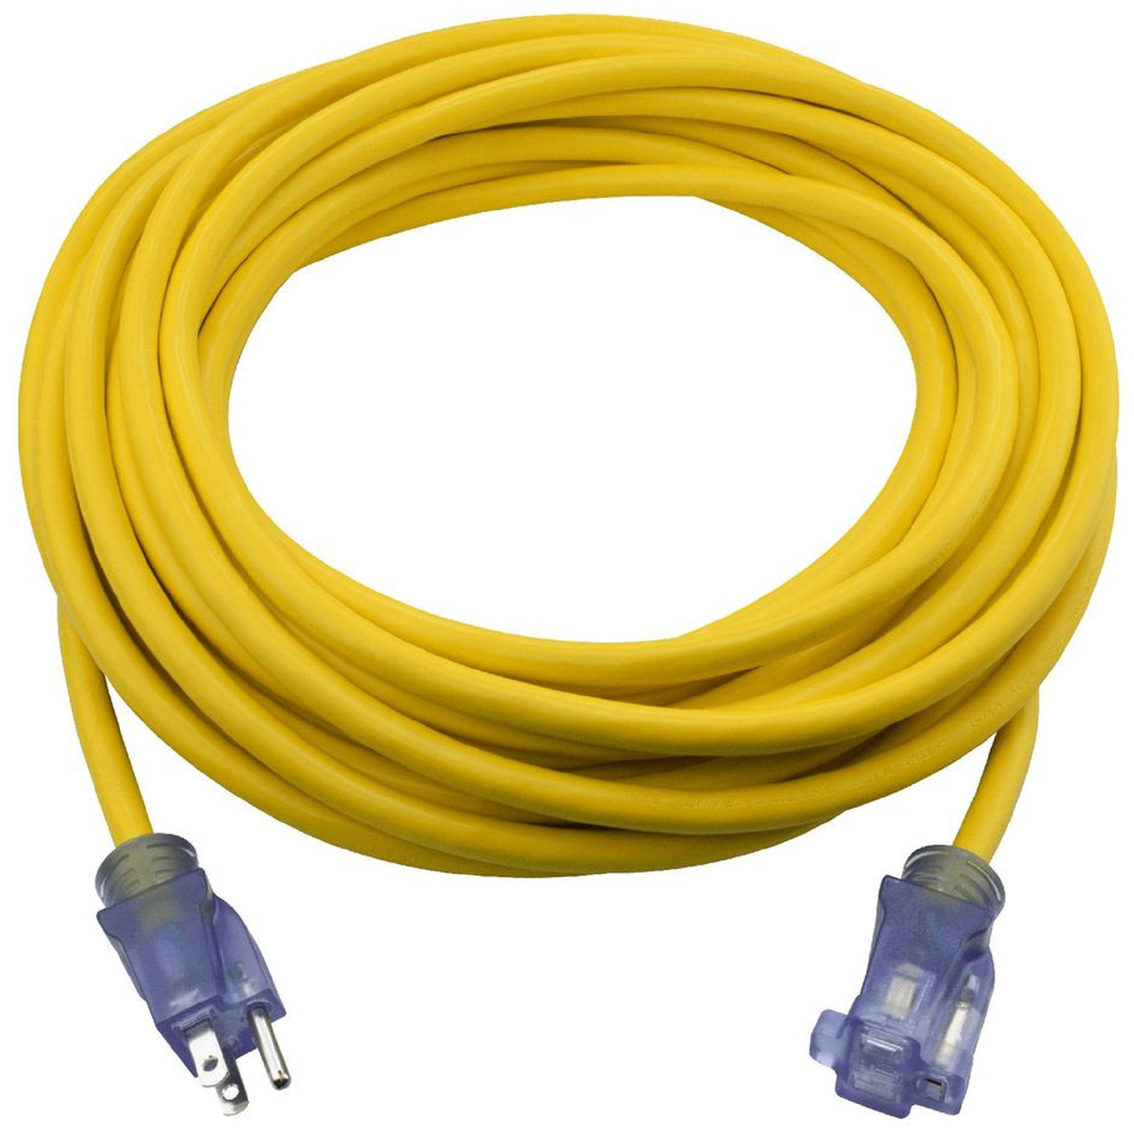 Prime Wire & Cable 50 ft. 12/3 SJTW Jobsite Outdoor Extension Cord - Image 2 of 2